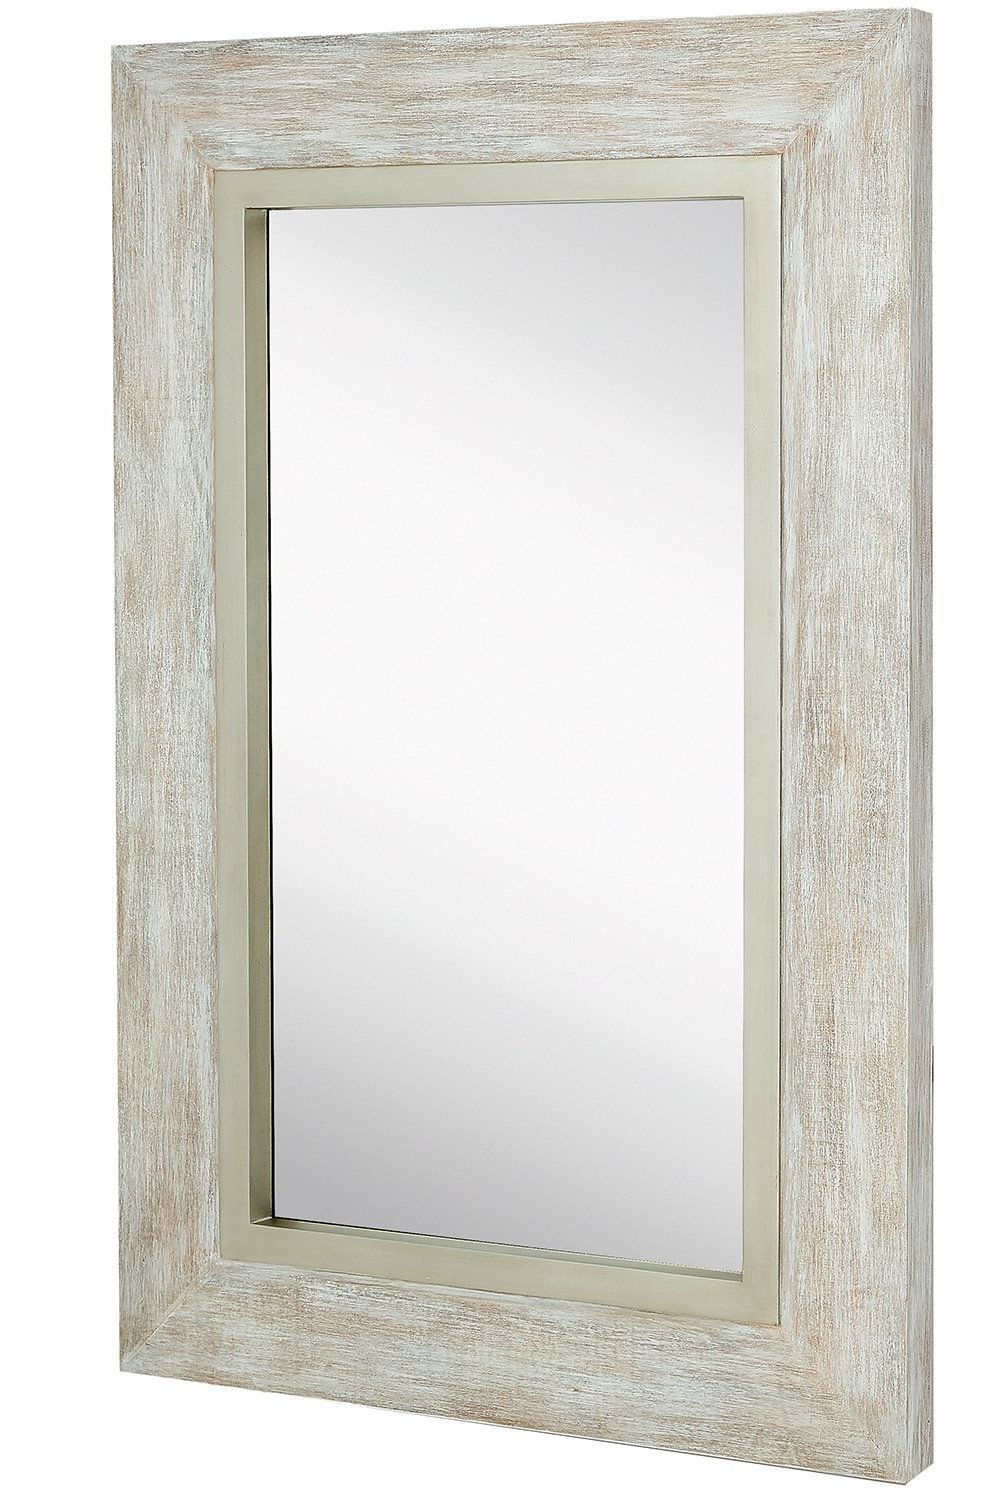 Most Recent Hamilton Hills Large White Washed Framed Mirror (View 18 of 20)